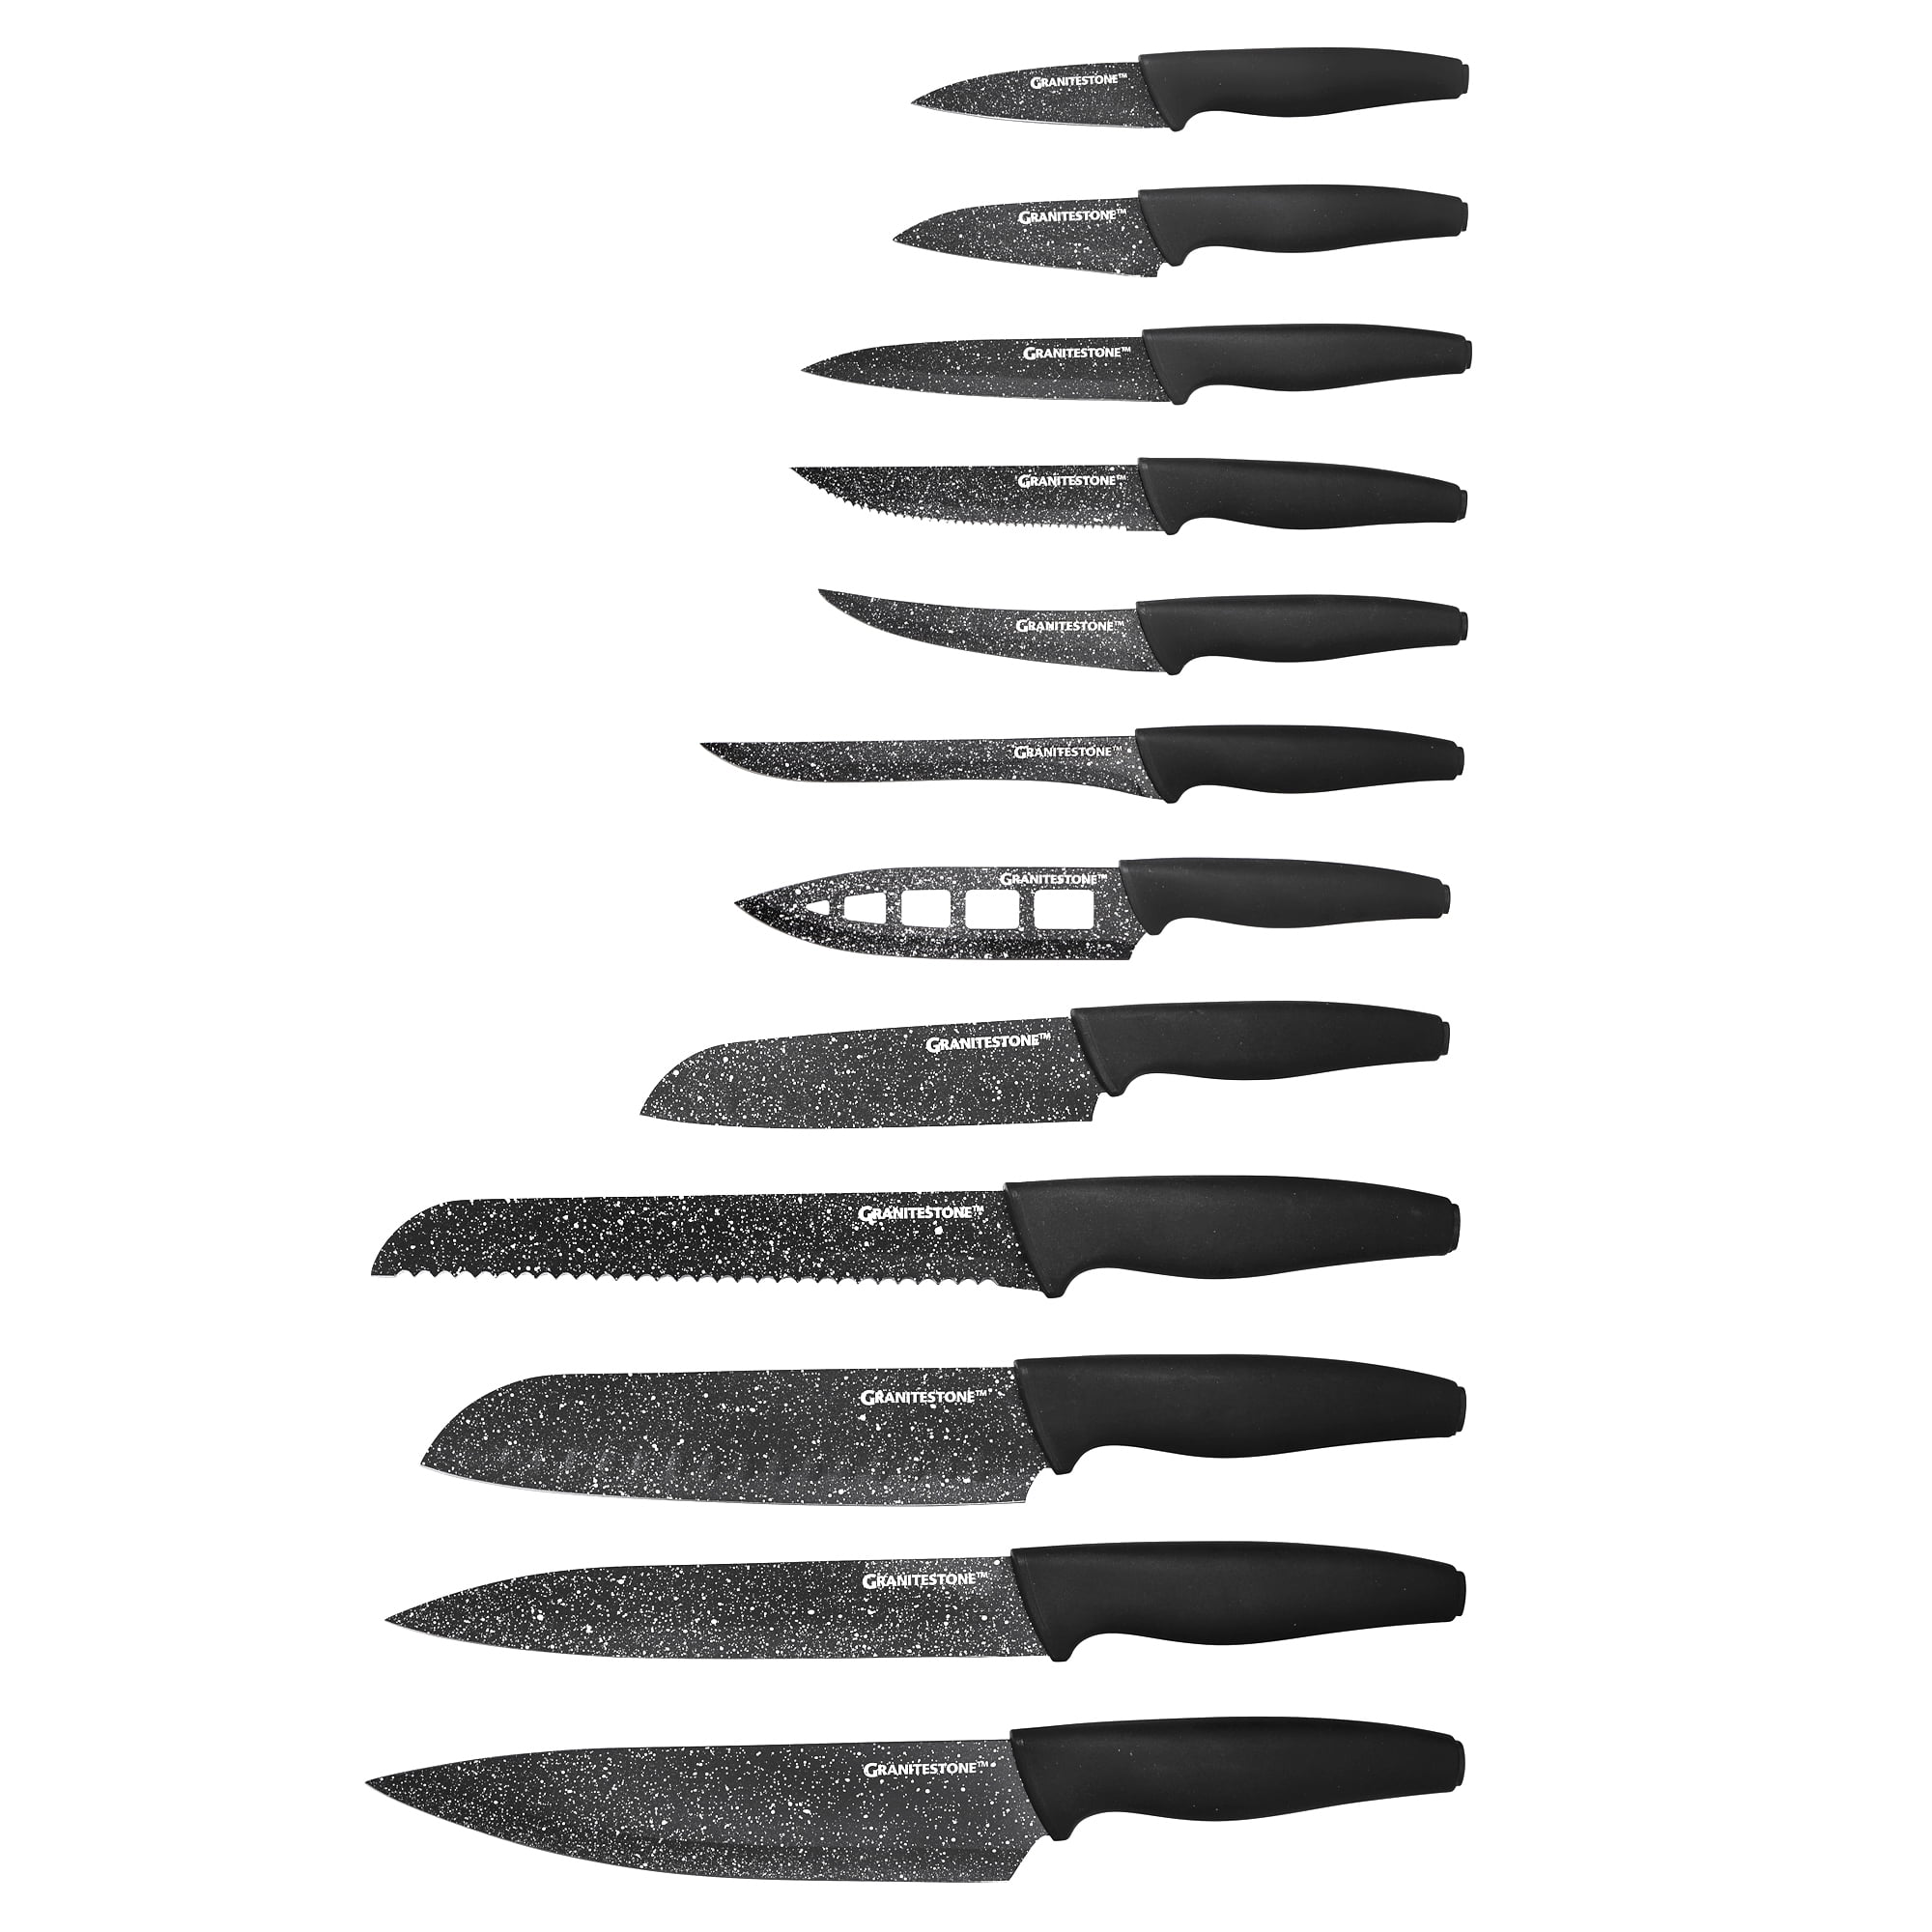  Granitestone Nutriblade 12-Piece Santoku Knives, High Grade  Professional Chef Kitchen Knives with Easy-Grip Handles, Stainless Steel  Rust-proof blades – Dishwasher-safe As Seen On TV: Home & Kitchen